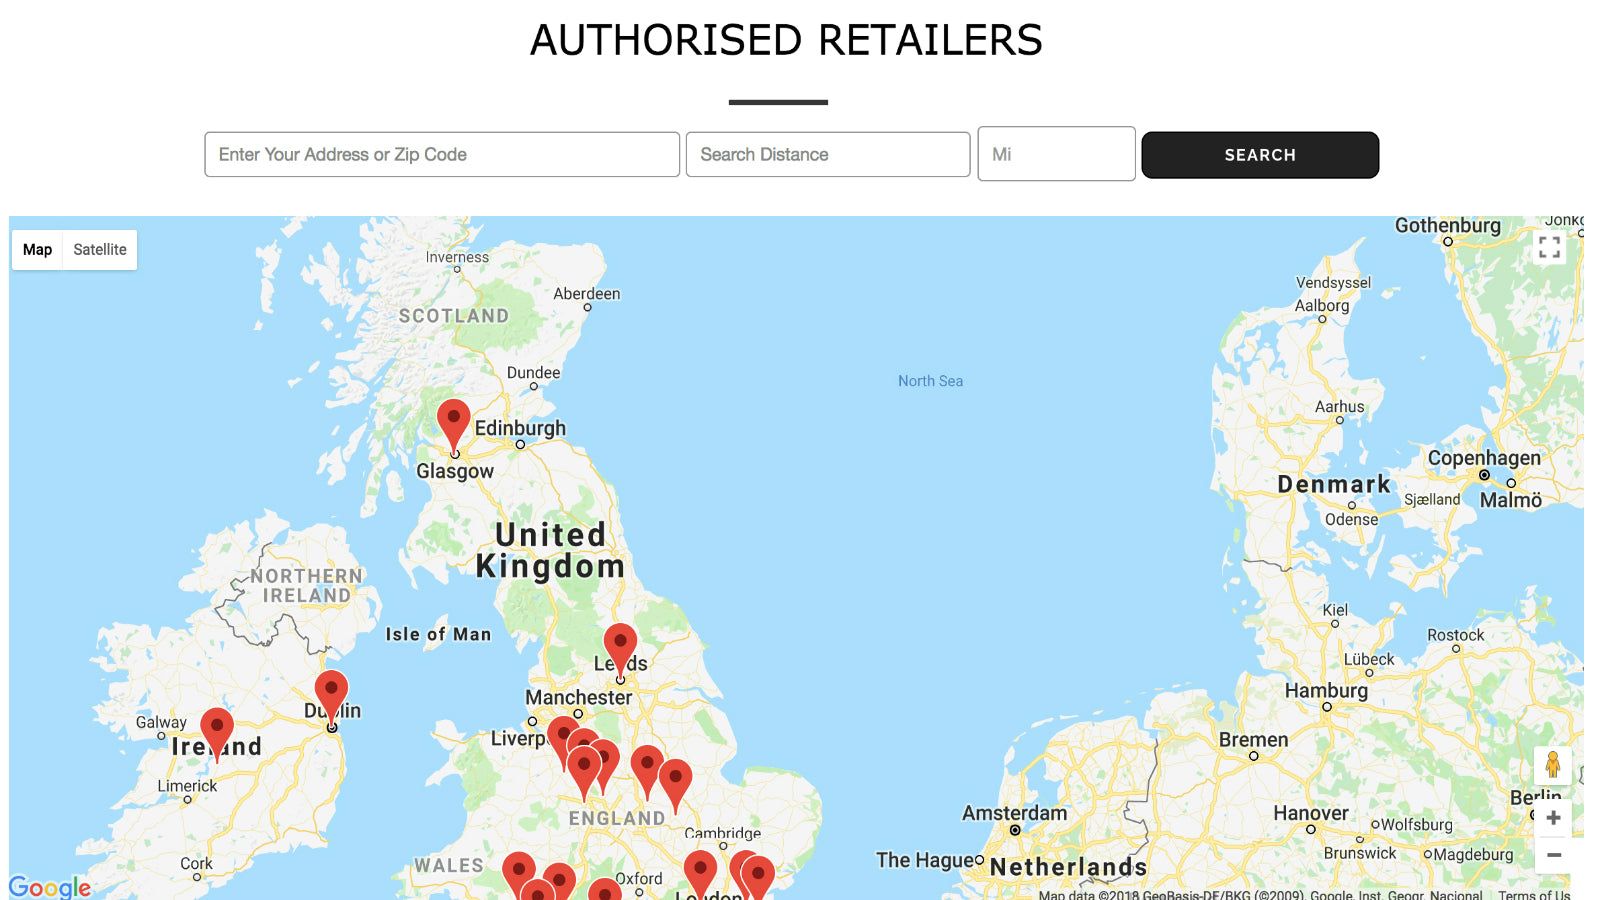 Stores displaying on Map